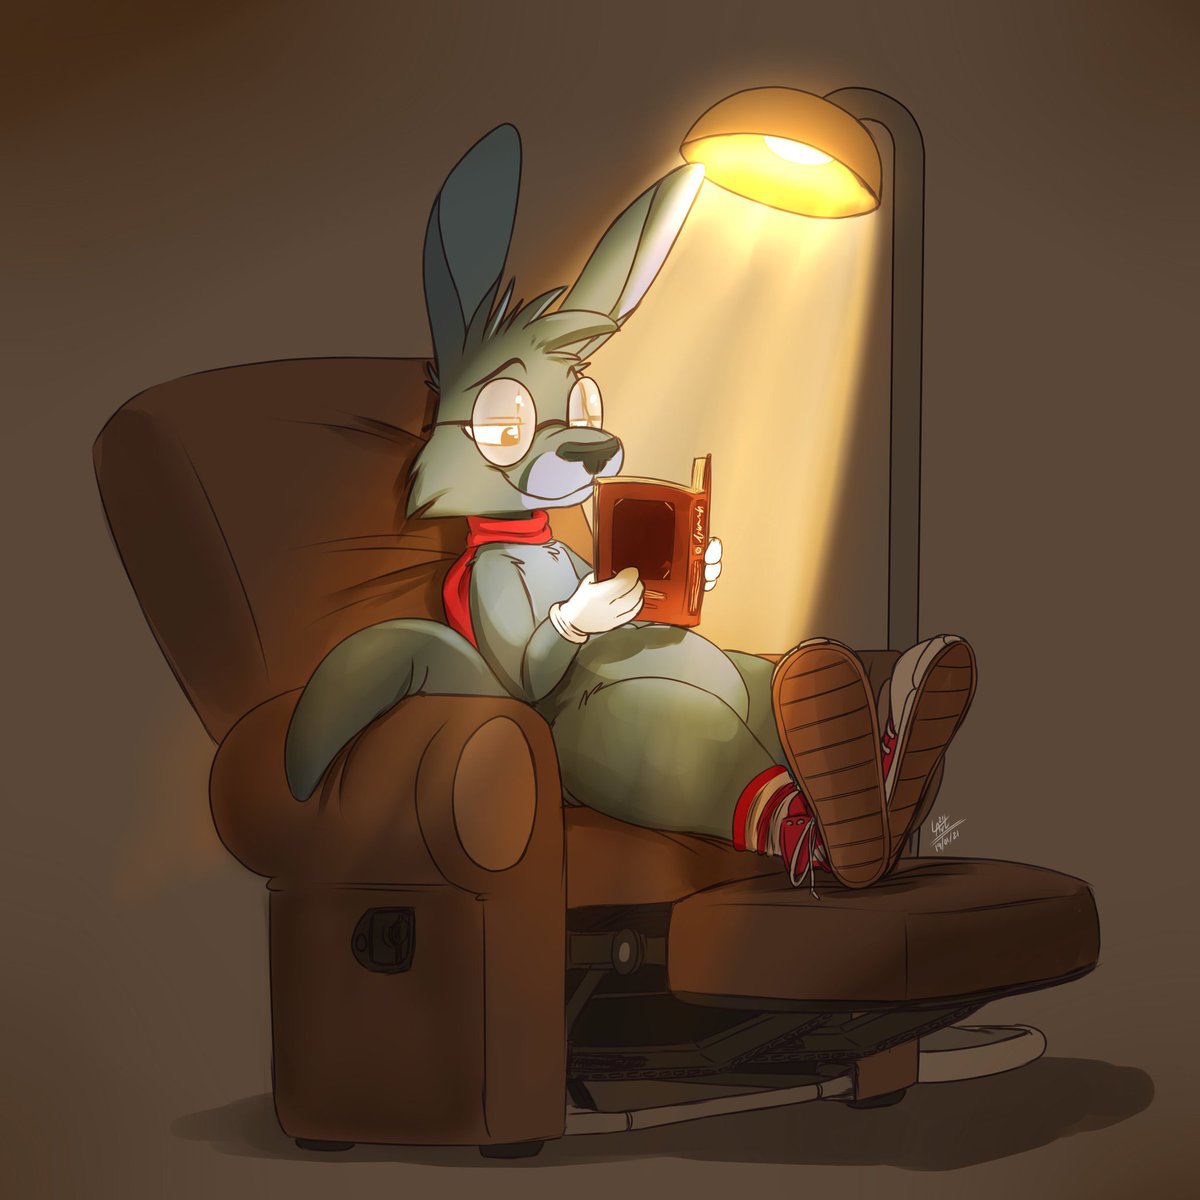 Sometimes you just gotta kick your big roo feet up with a good book

artwork by @Lou_Art_93